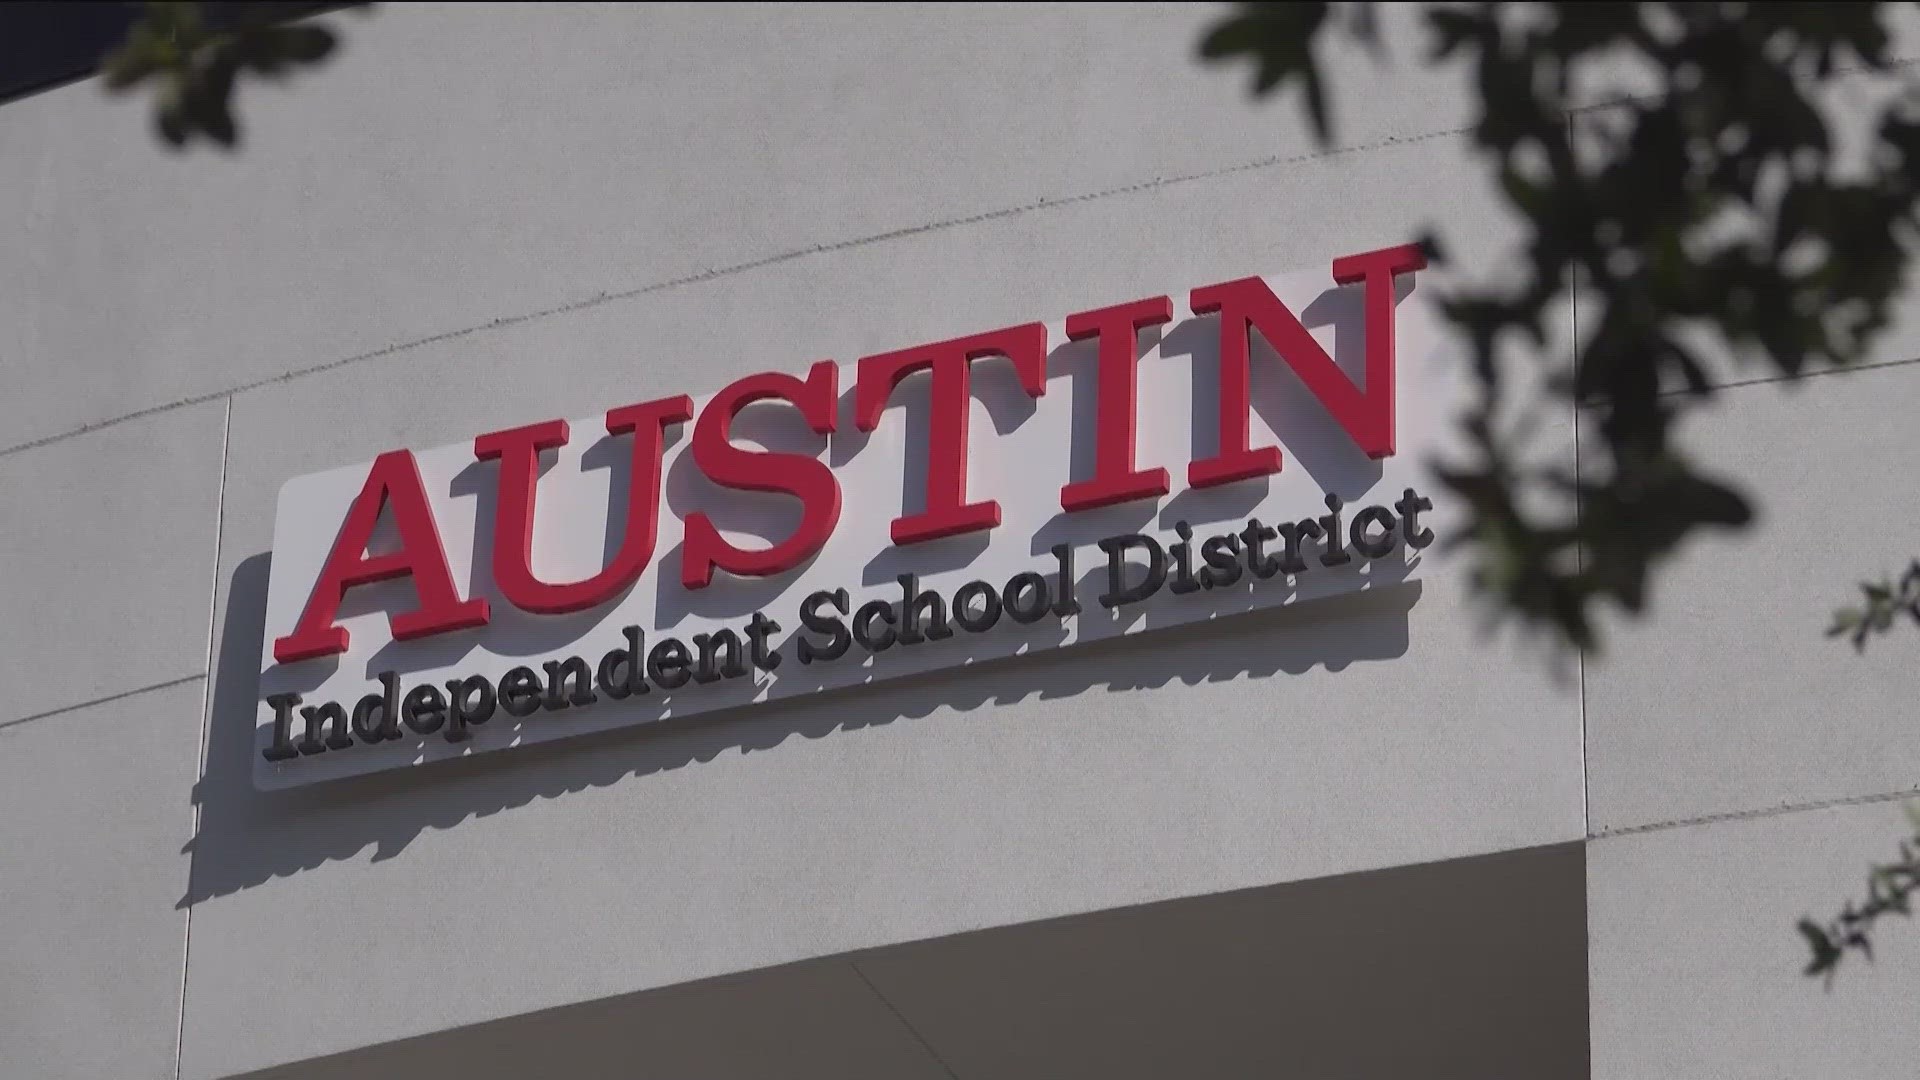 Austin ISD is facing a $60 million deficit if it spends as much as it did last year. Now trustees are considering turning to taxpayers for help.